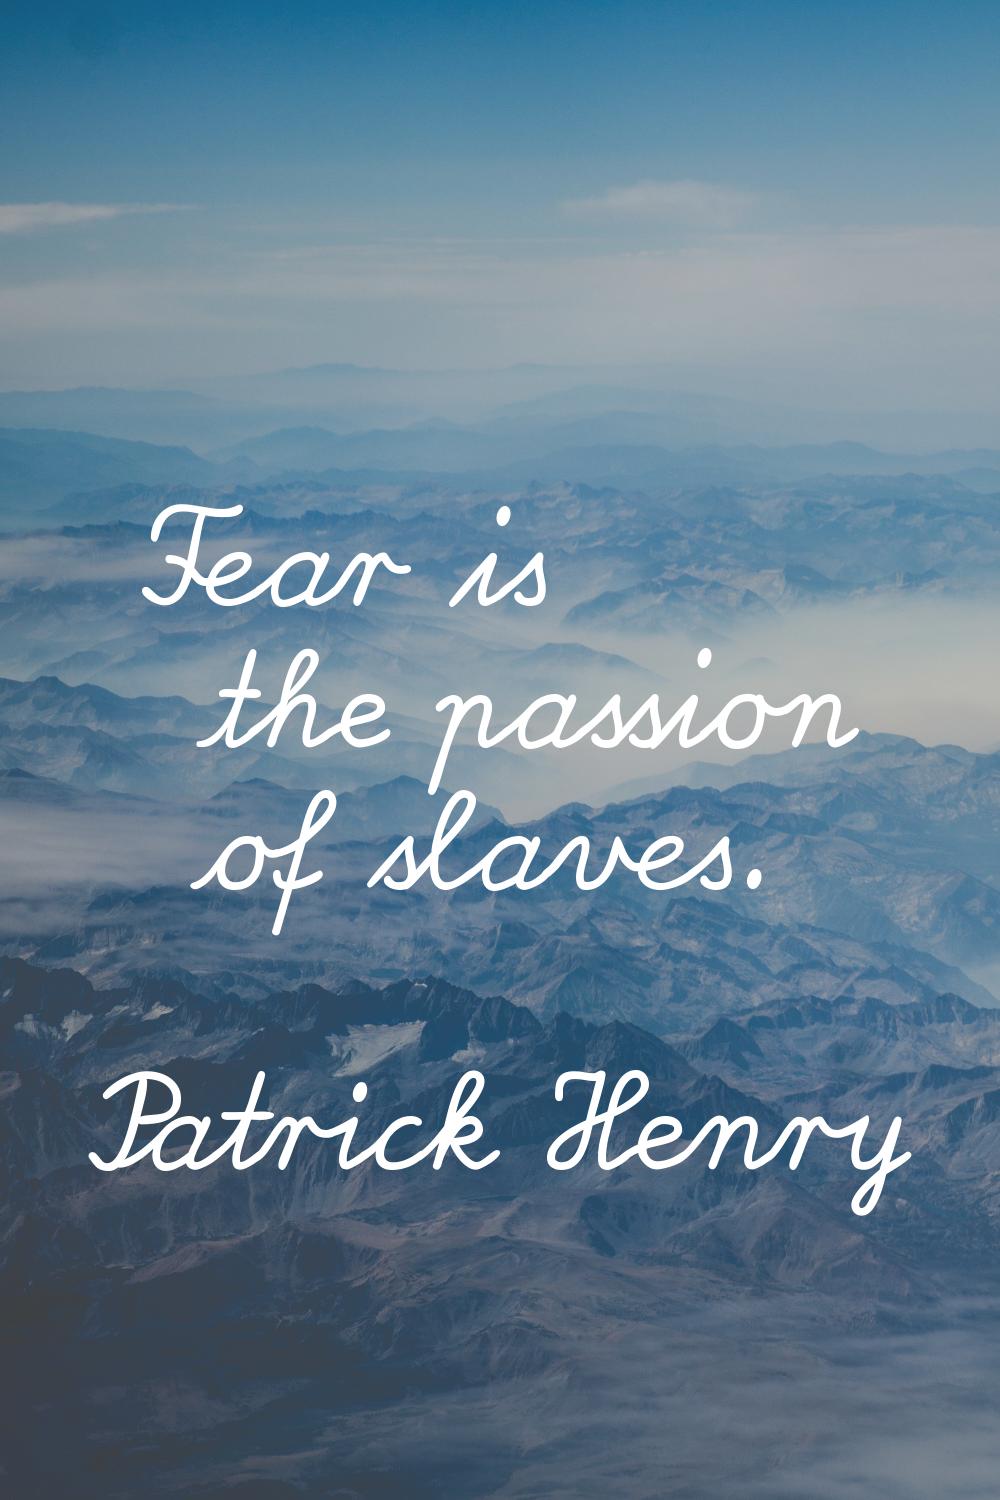 Fear is the passion of slaves.